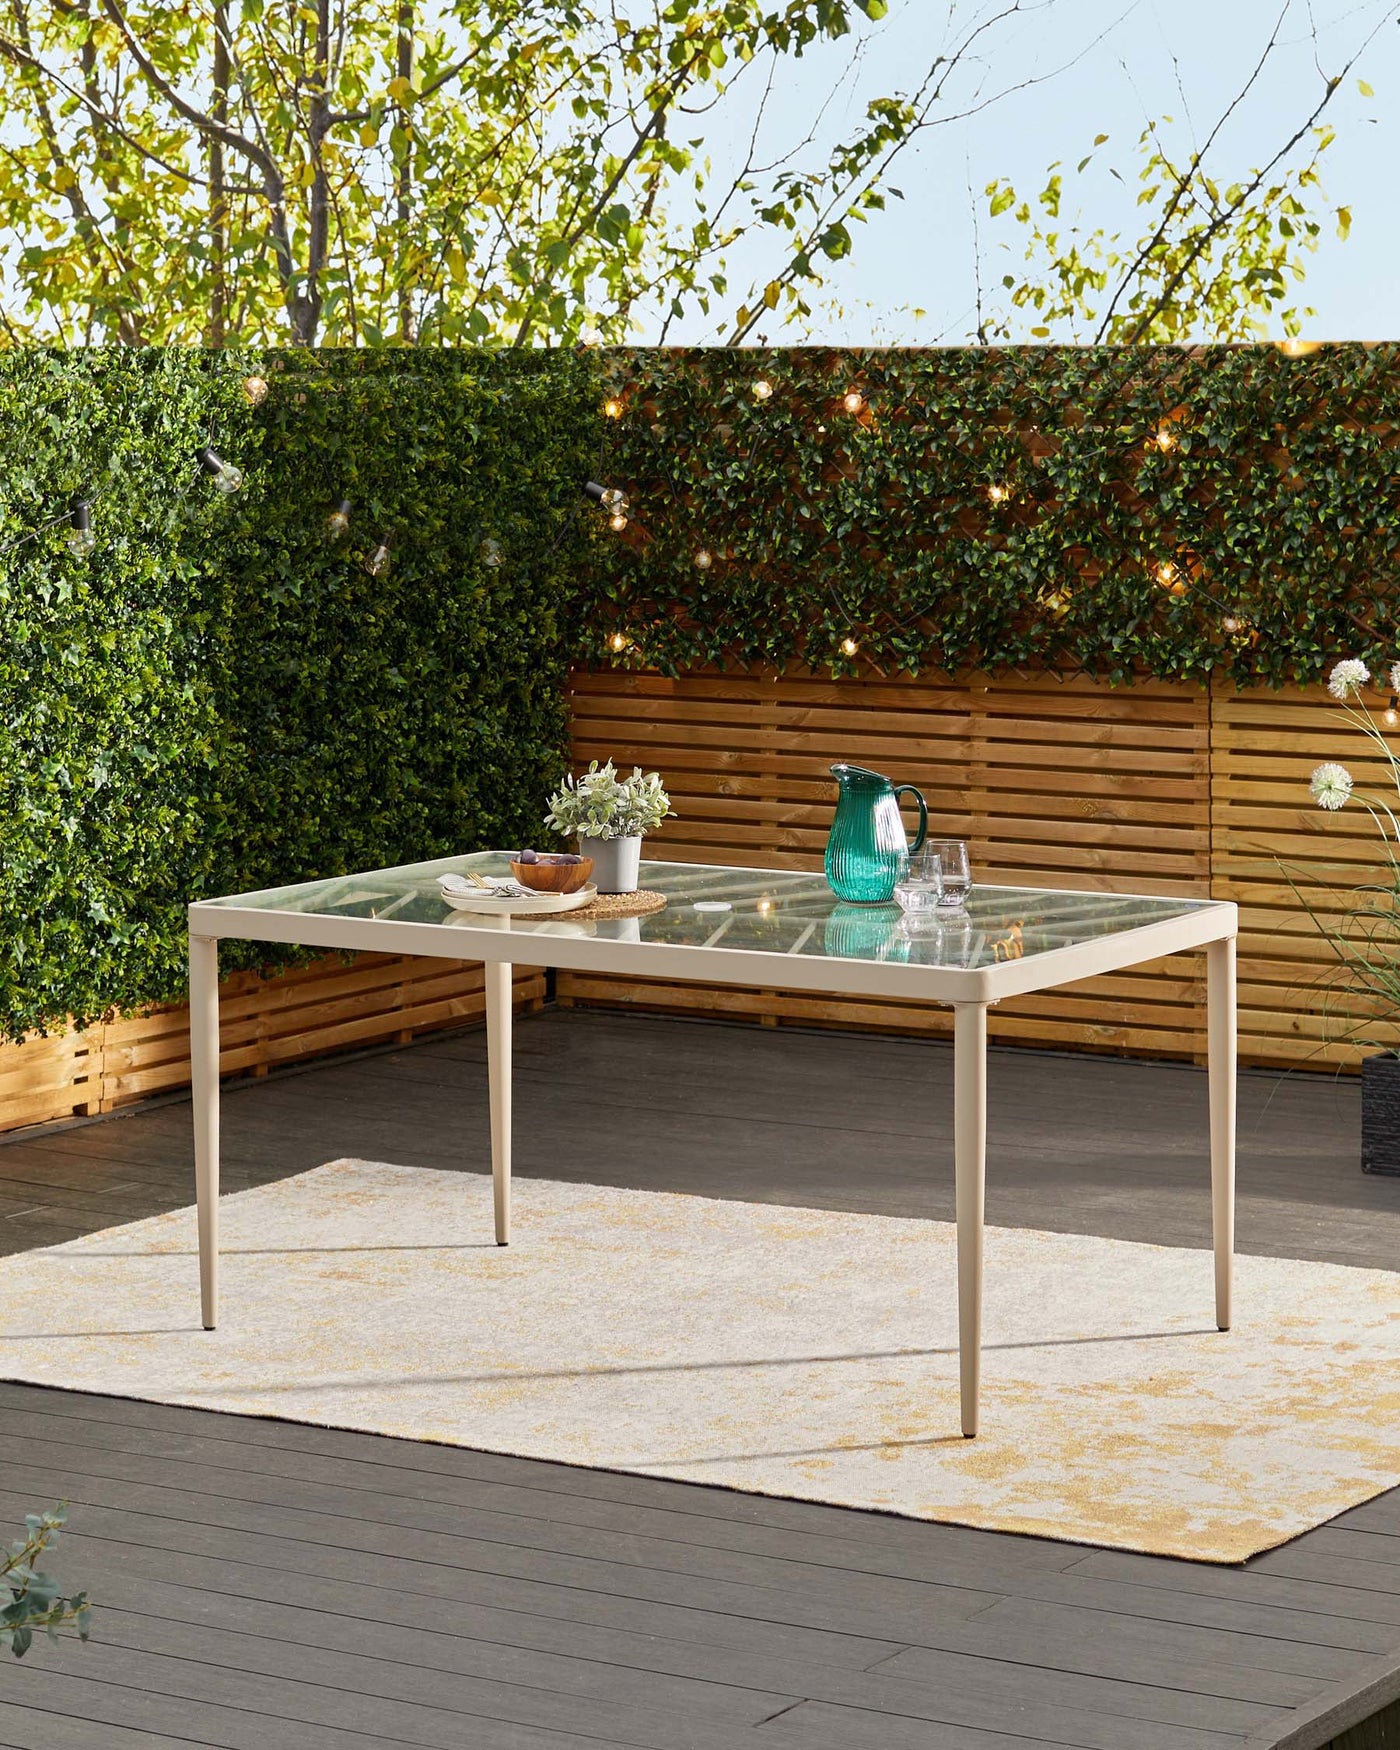 Modern outdoor rectangular dining table with a translucent glass top and beige metal frame, displayed on a cream and yellow patterned outdoor area rug.